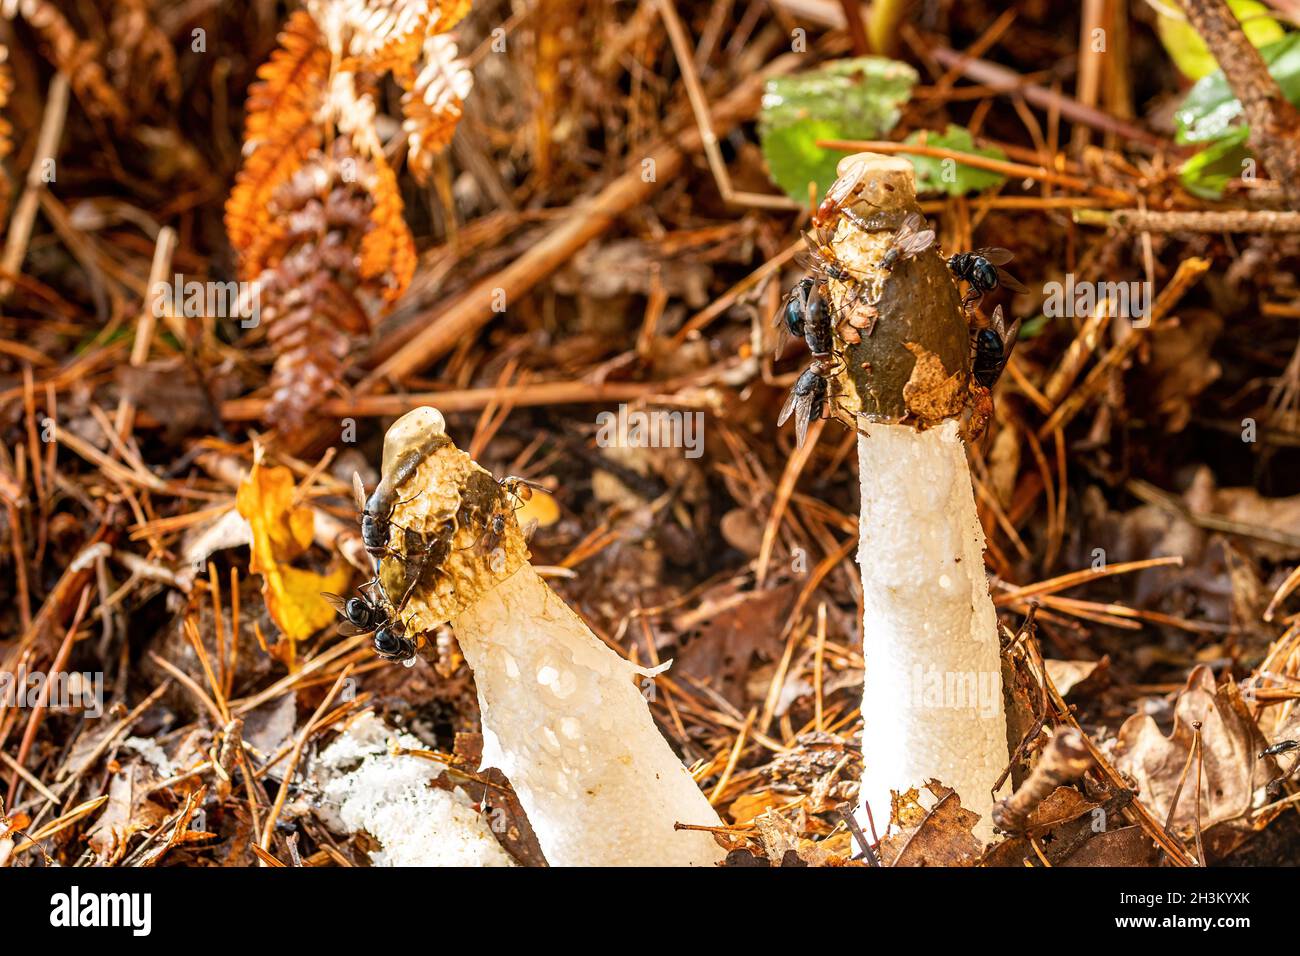 Common stinkhorn fungus (Phallus impudicus) with lots of flies feeding on it attracted by the foul smell odour, UK woodland during autumn fall. Stock Photo